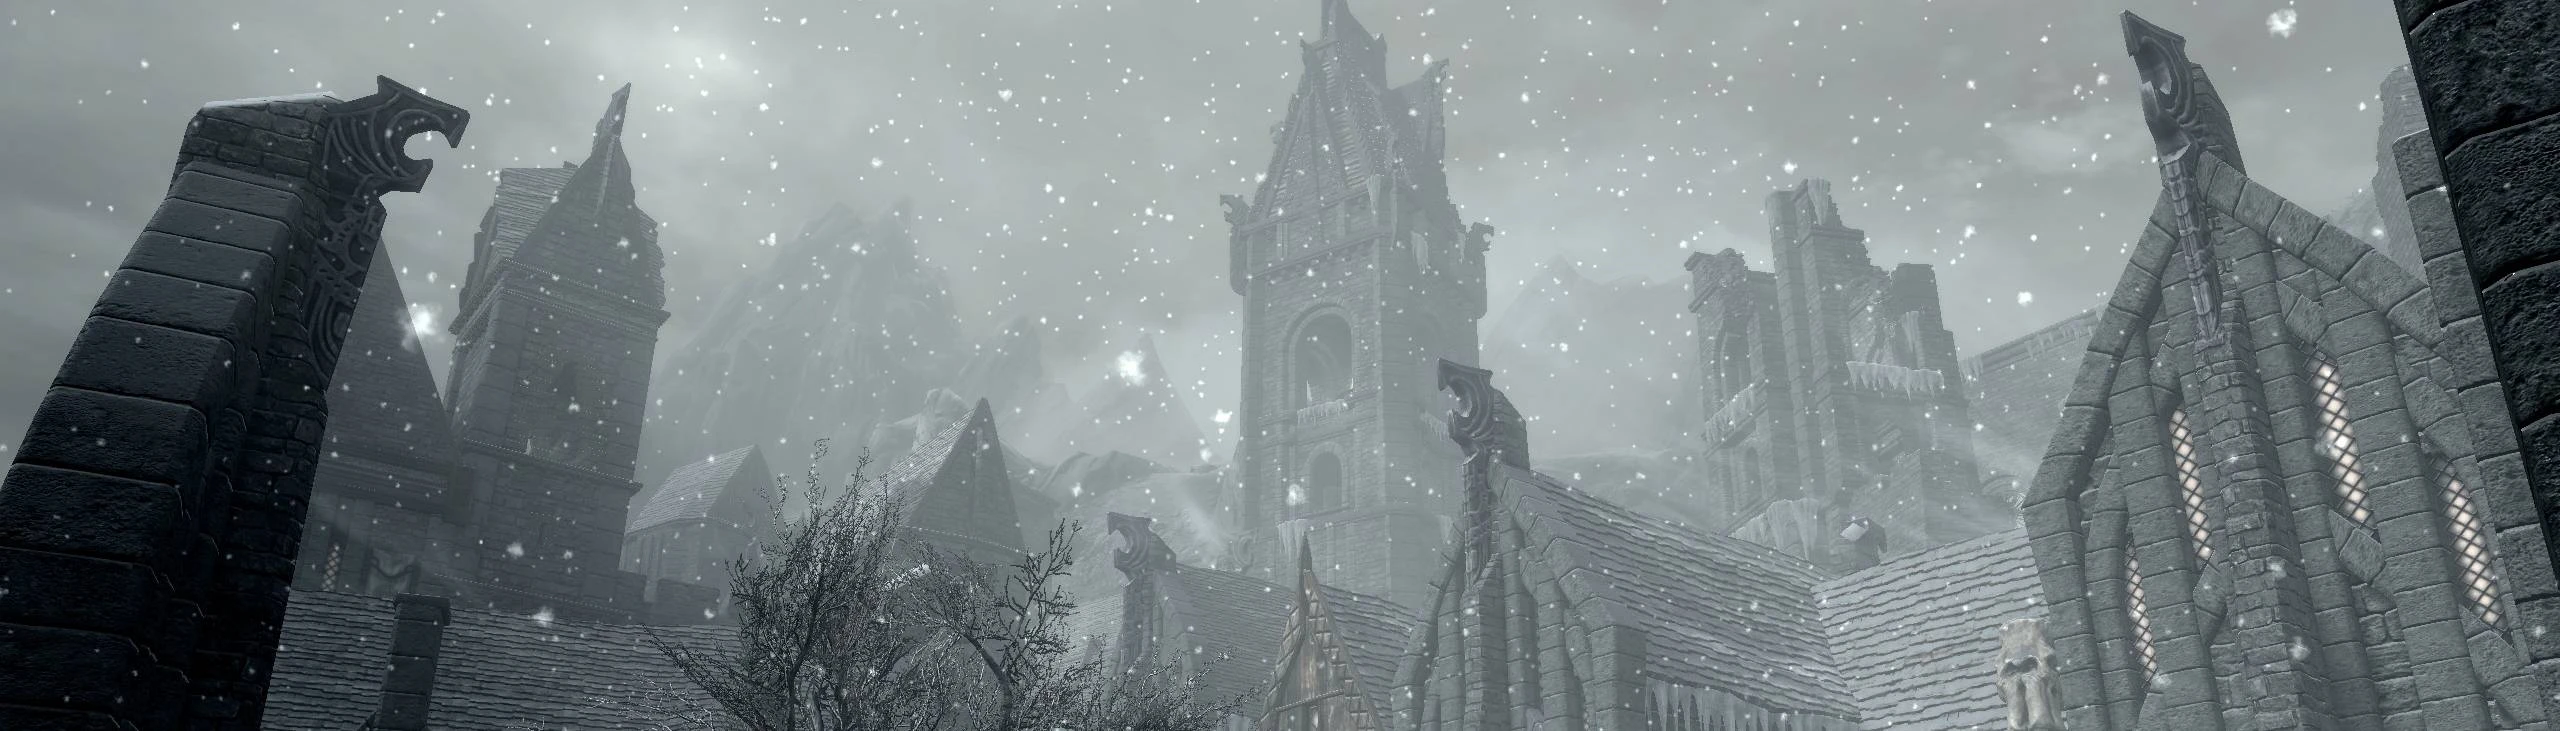 eFPS - The Great City Of Winterhold v4 Patch at Skyrim Special Edition ...